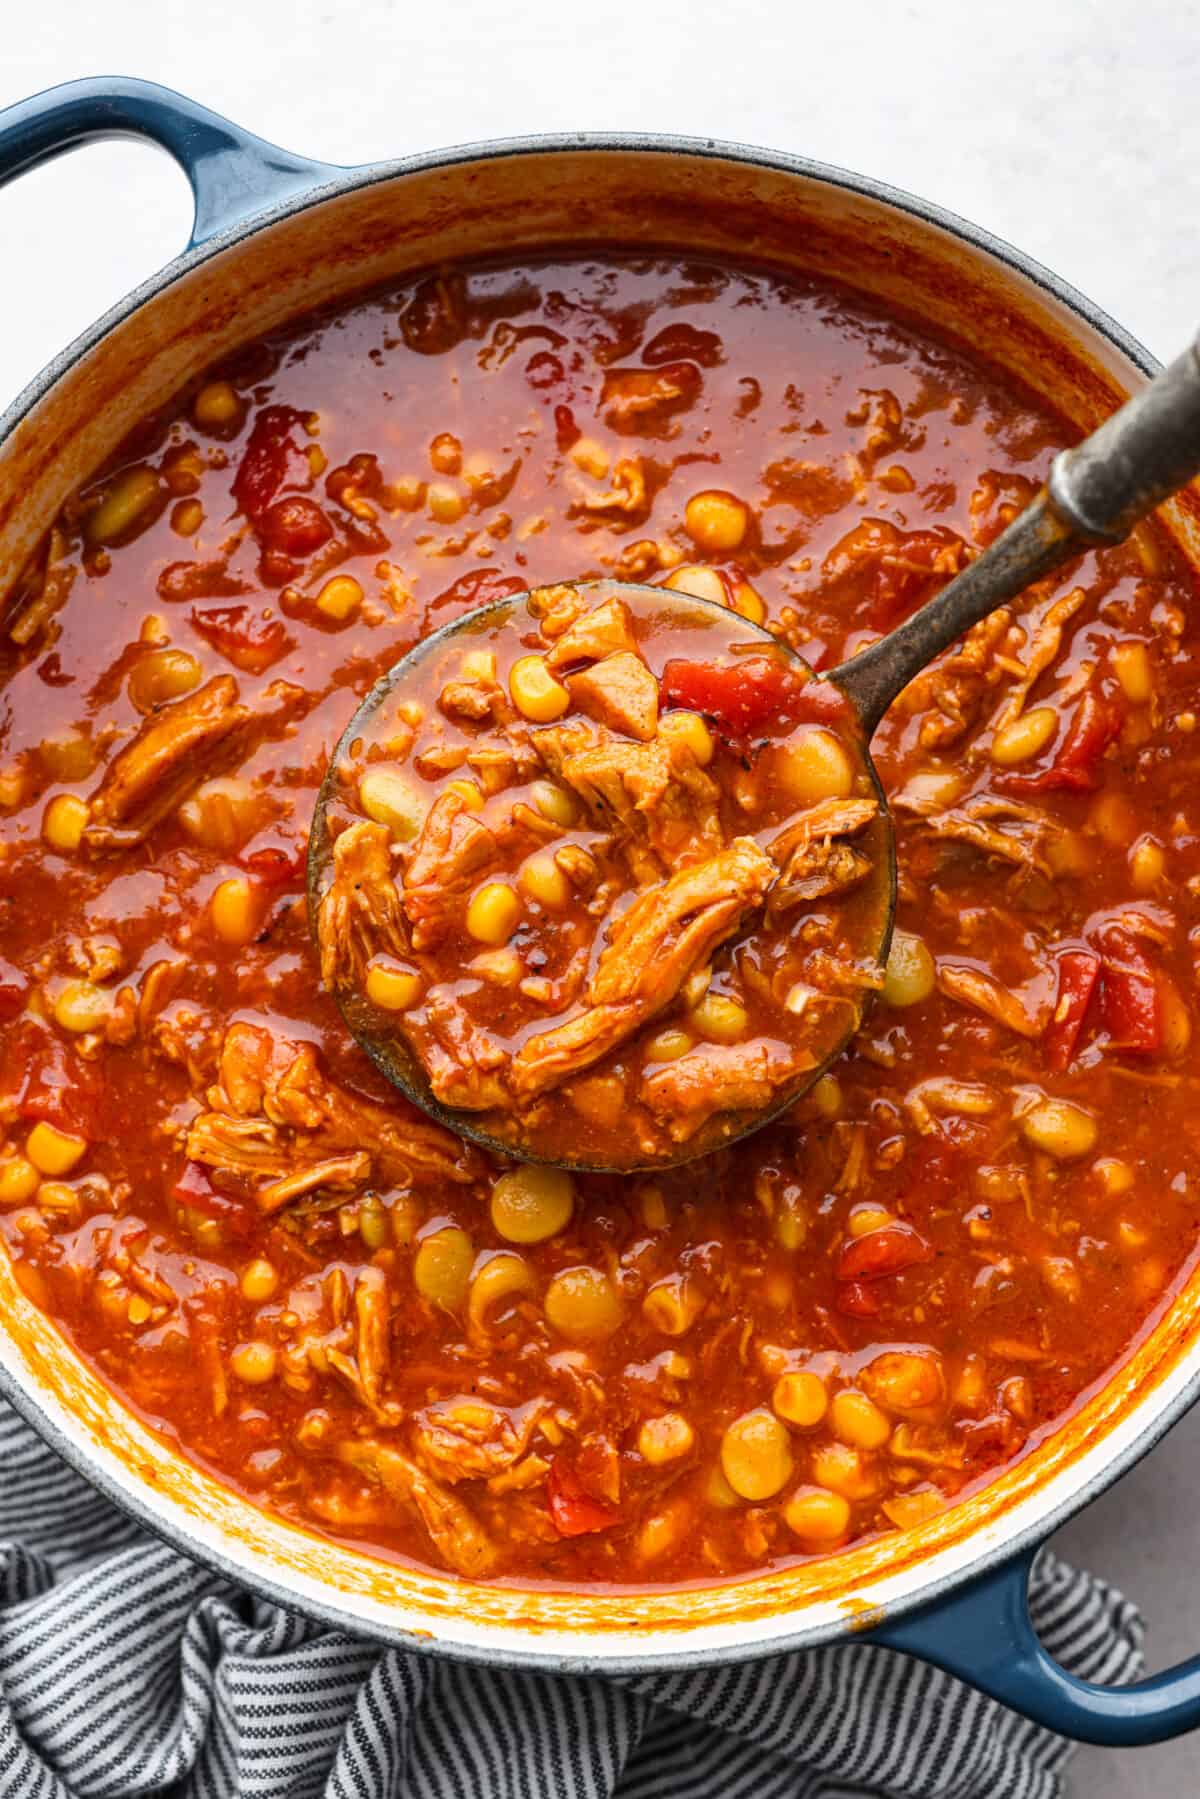 Cooked Brunswick stew in a large pot, being scooped up with a ladle.